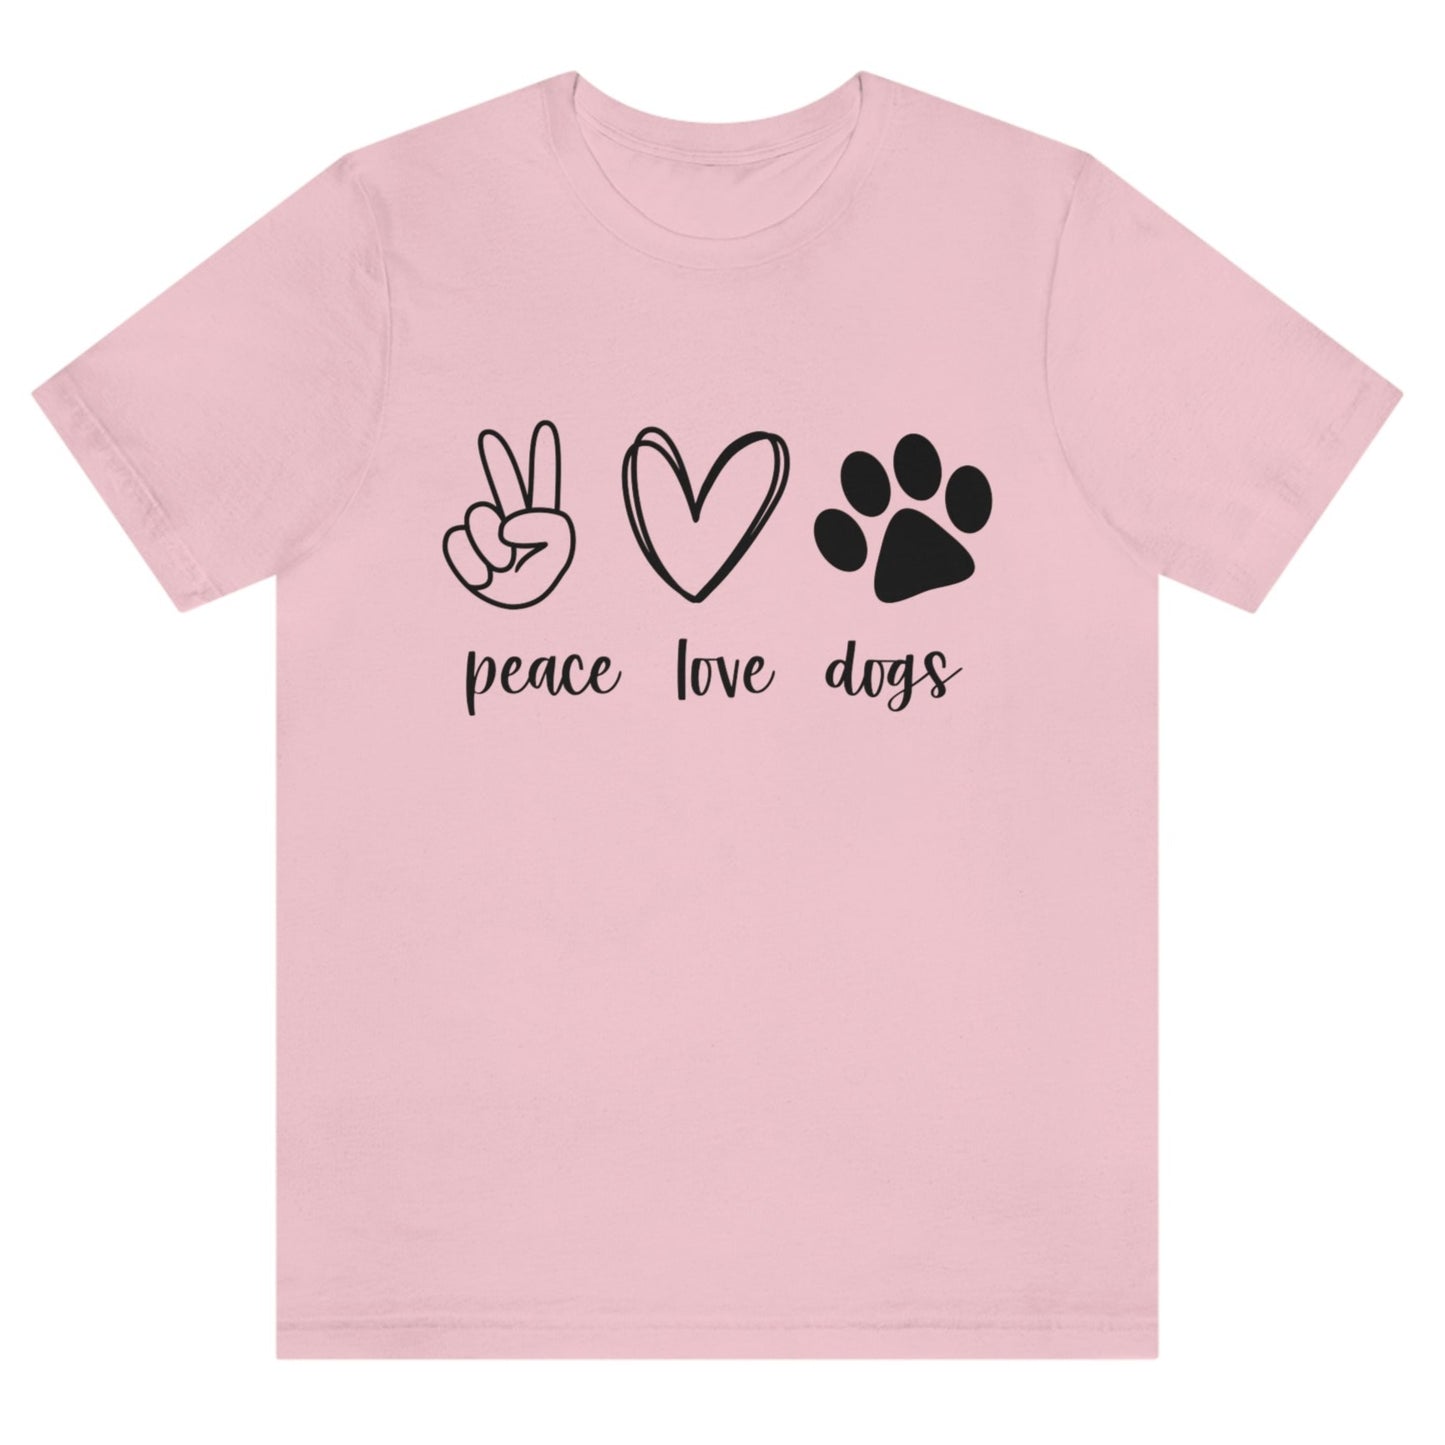    peace-love-dogs-pink-t-shirt